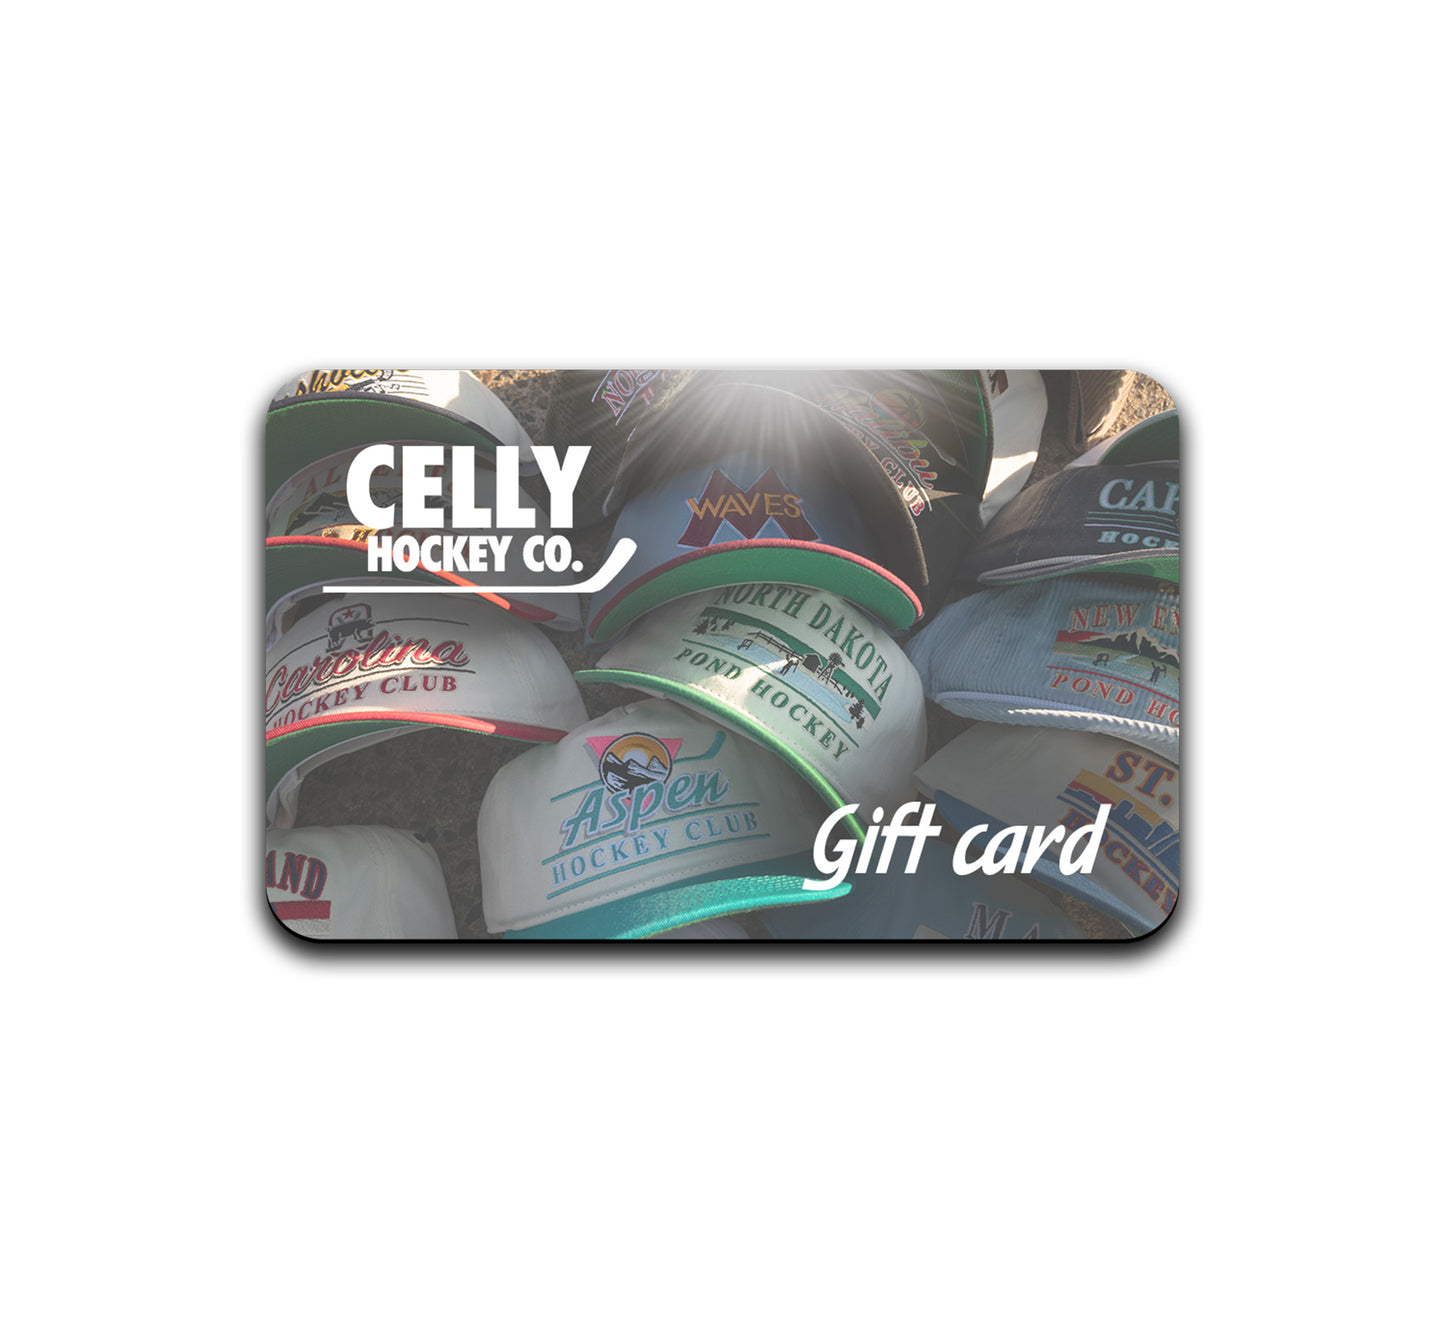 Celly Hockey Co. Gift Card